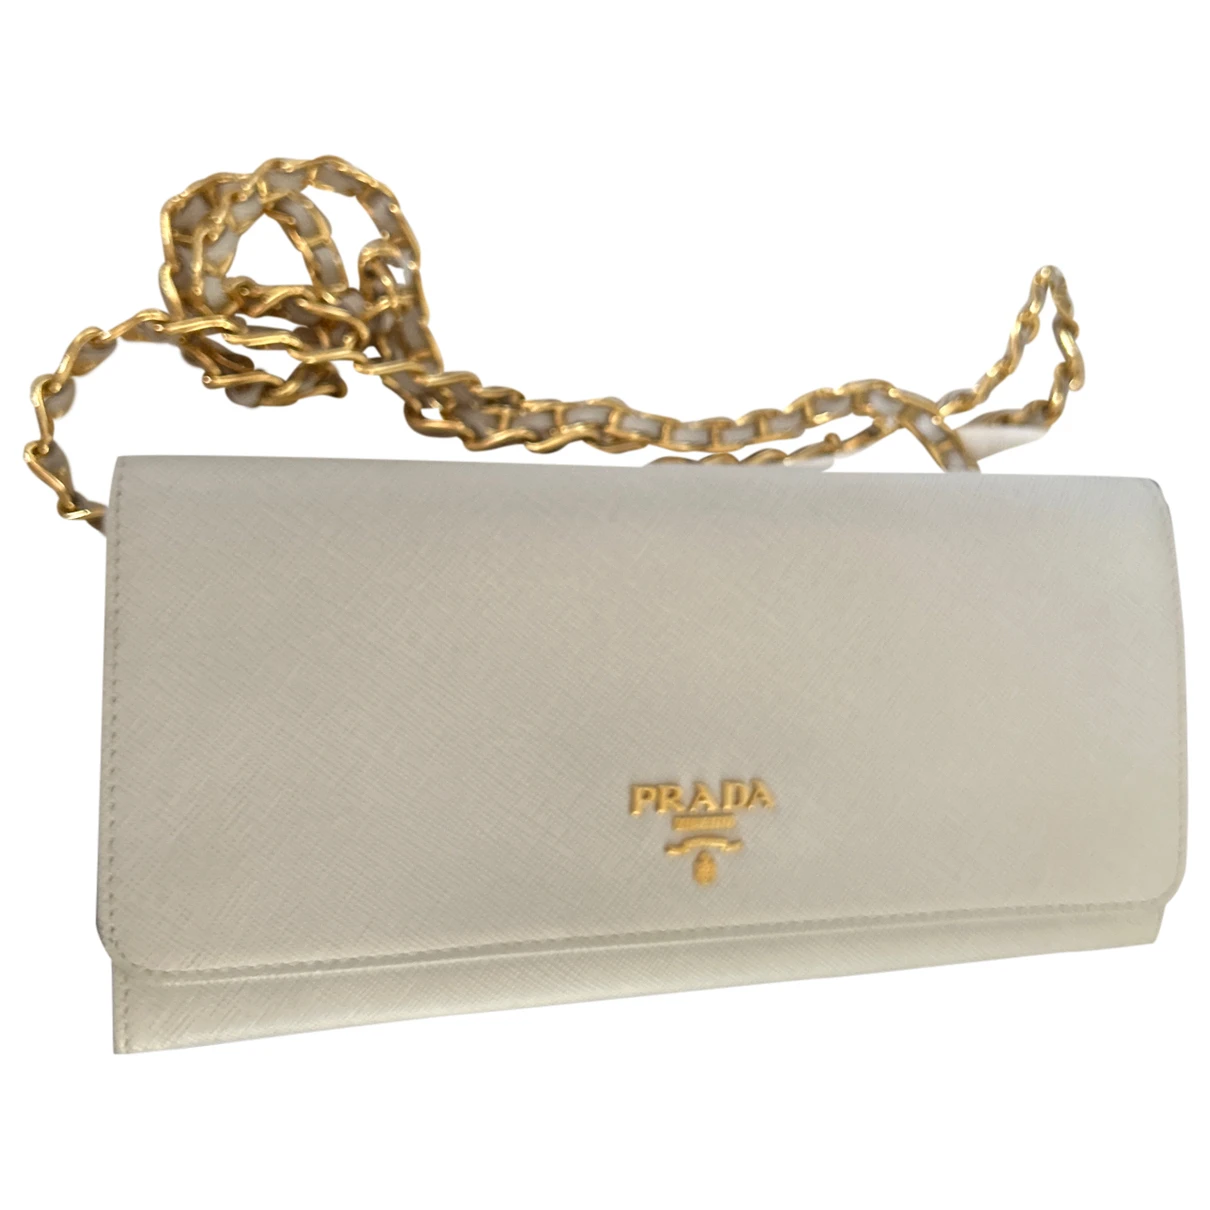 bags Prada clutch bags for Female Leather. Used condition